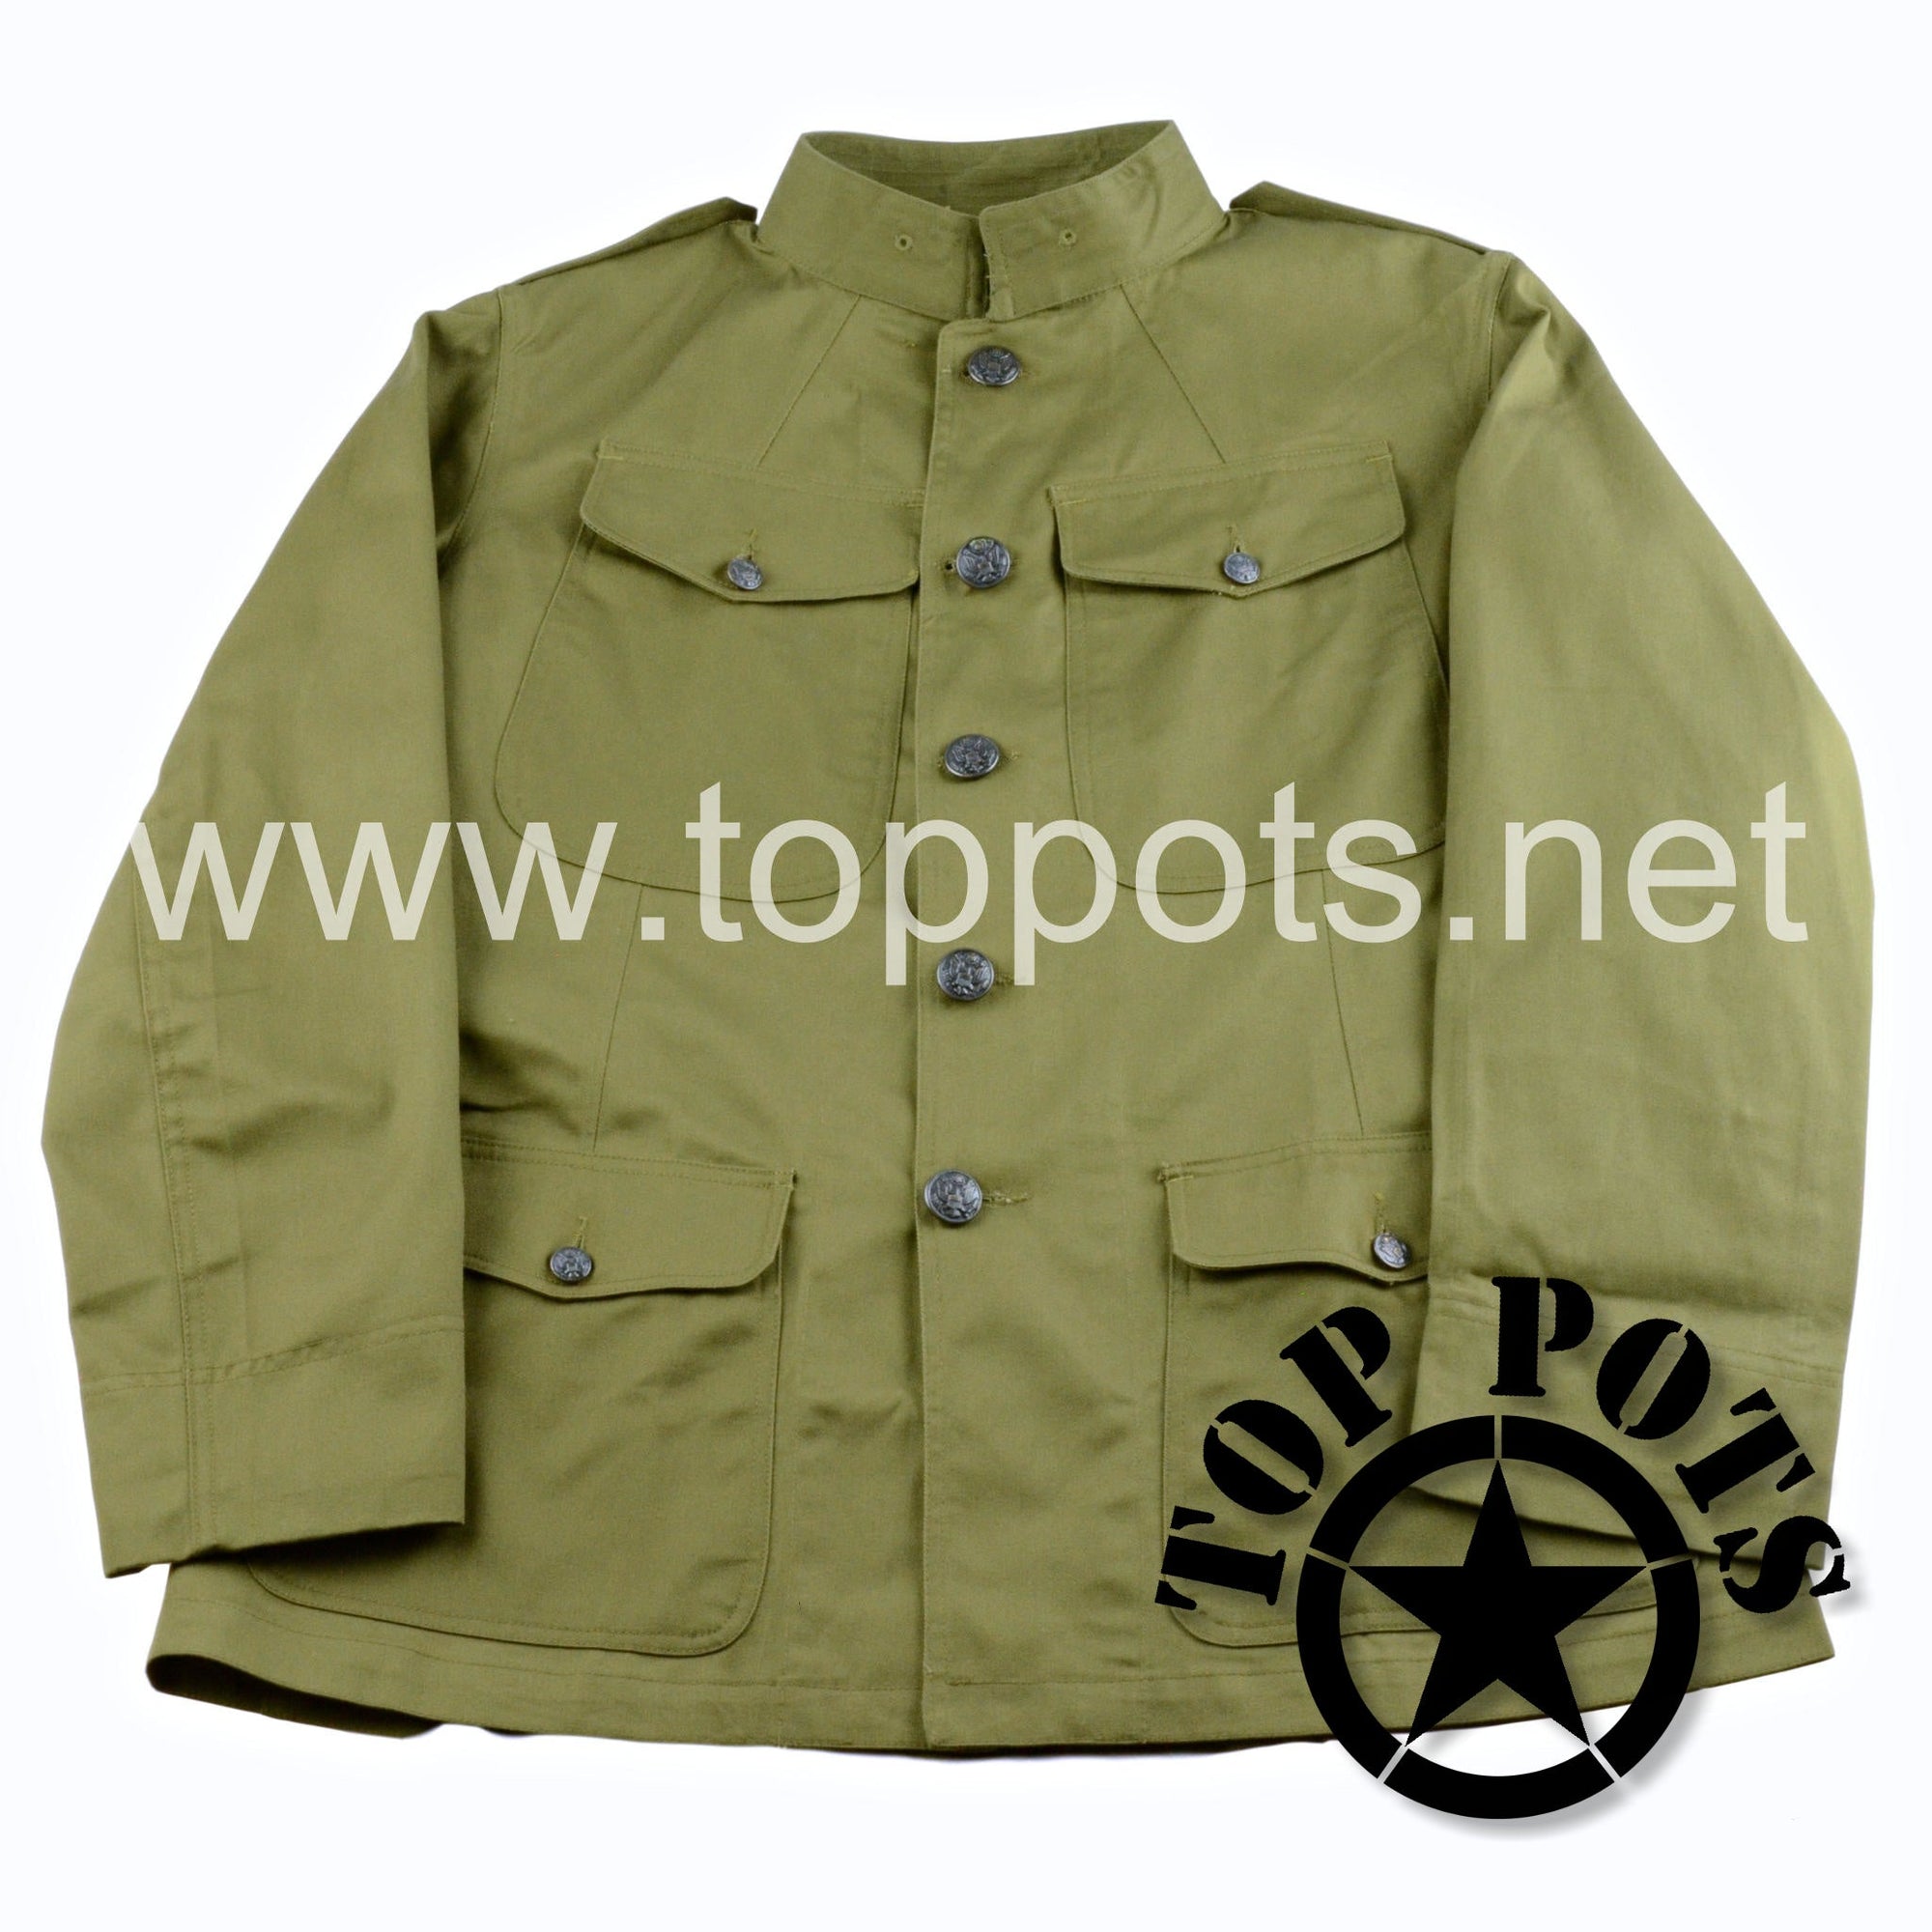 WWI US Army Reproduction American Doughboy M1912 Cotton Enlisted Summer Uniform Jacket and Pant Purchase (50" Chest and 44" Waist)